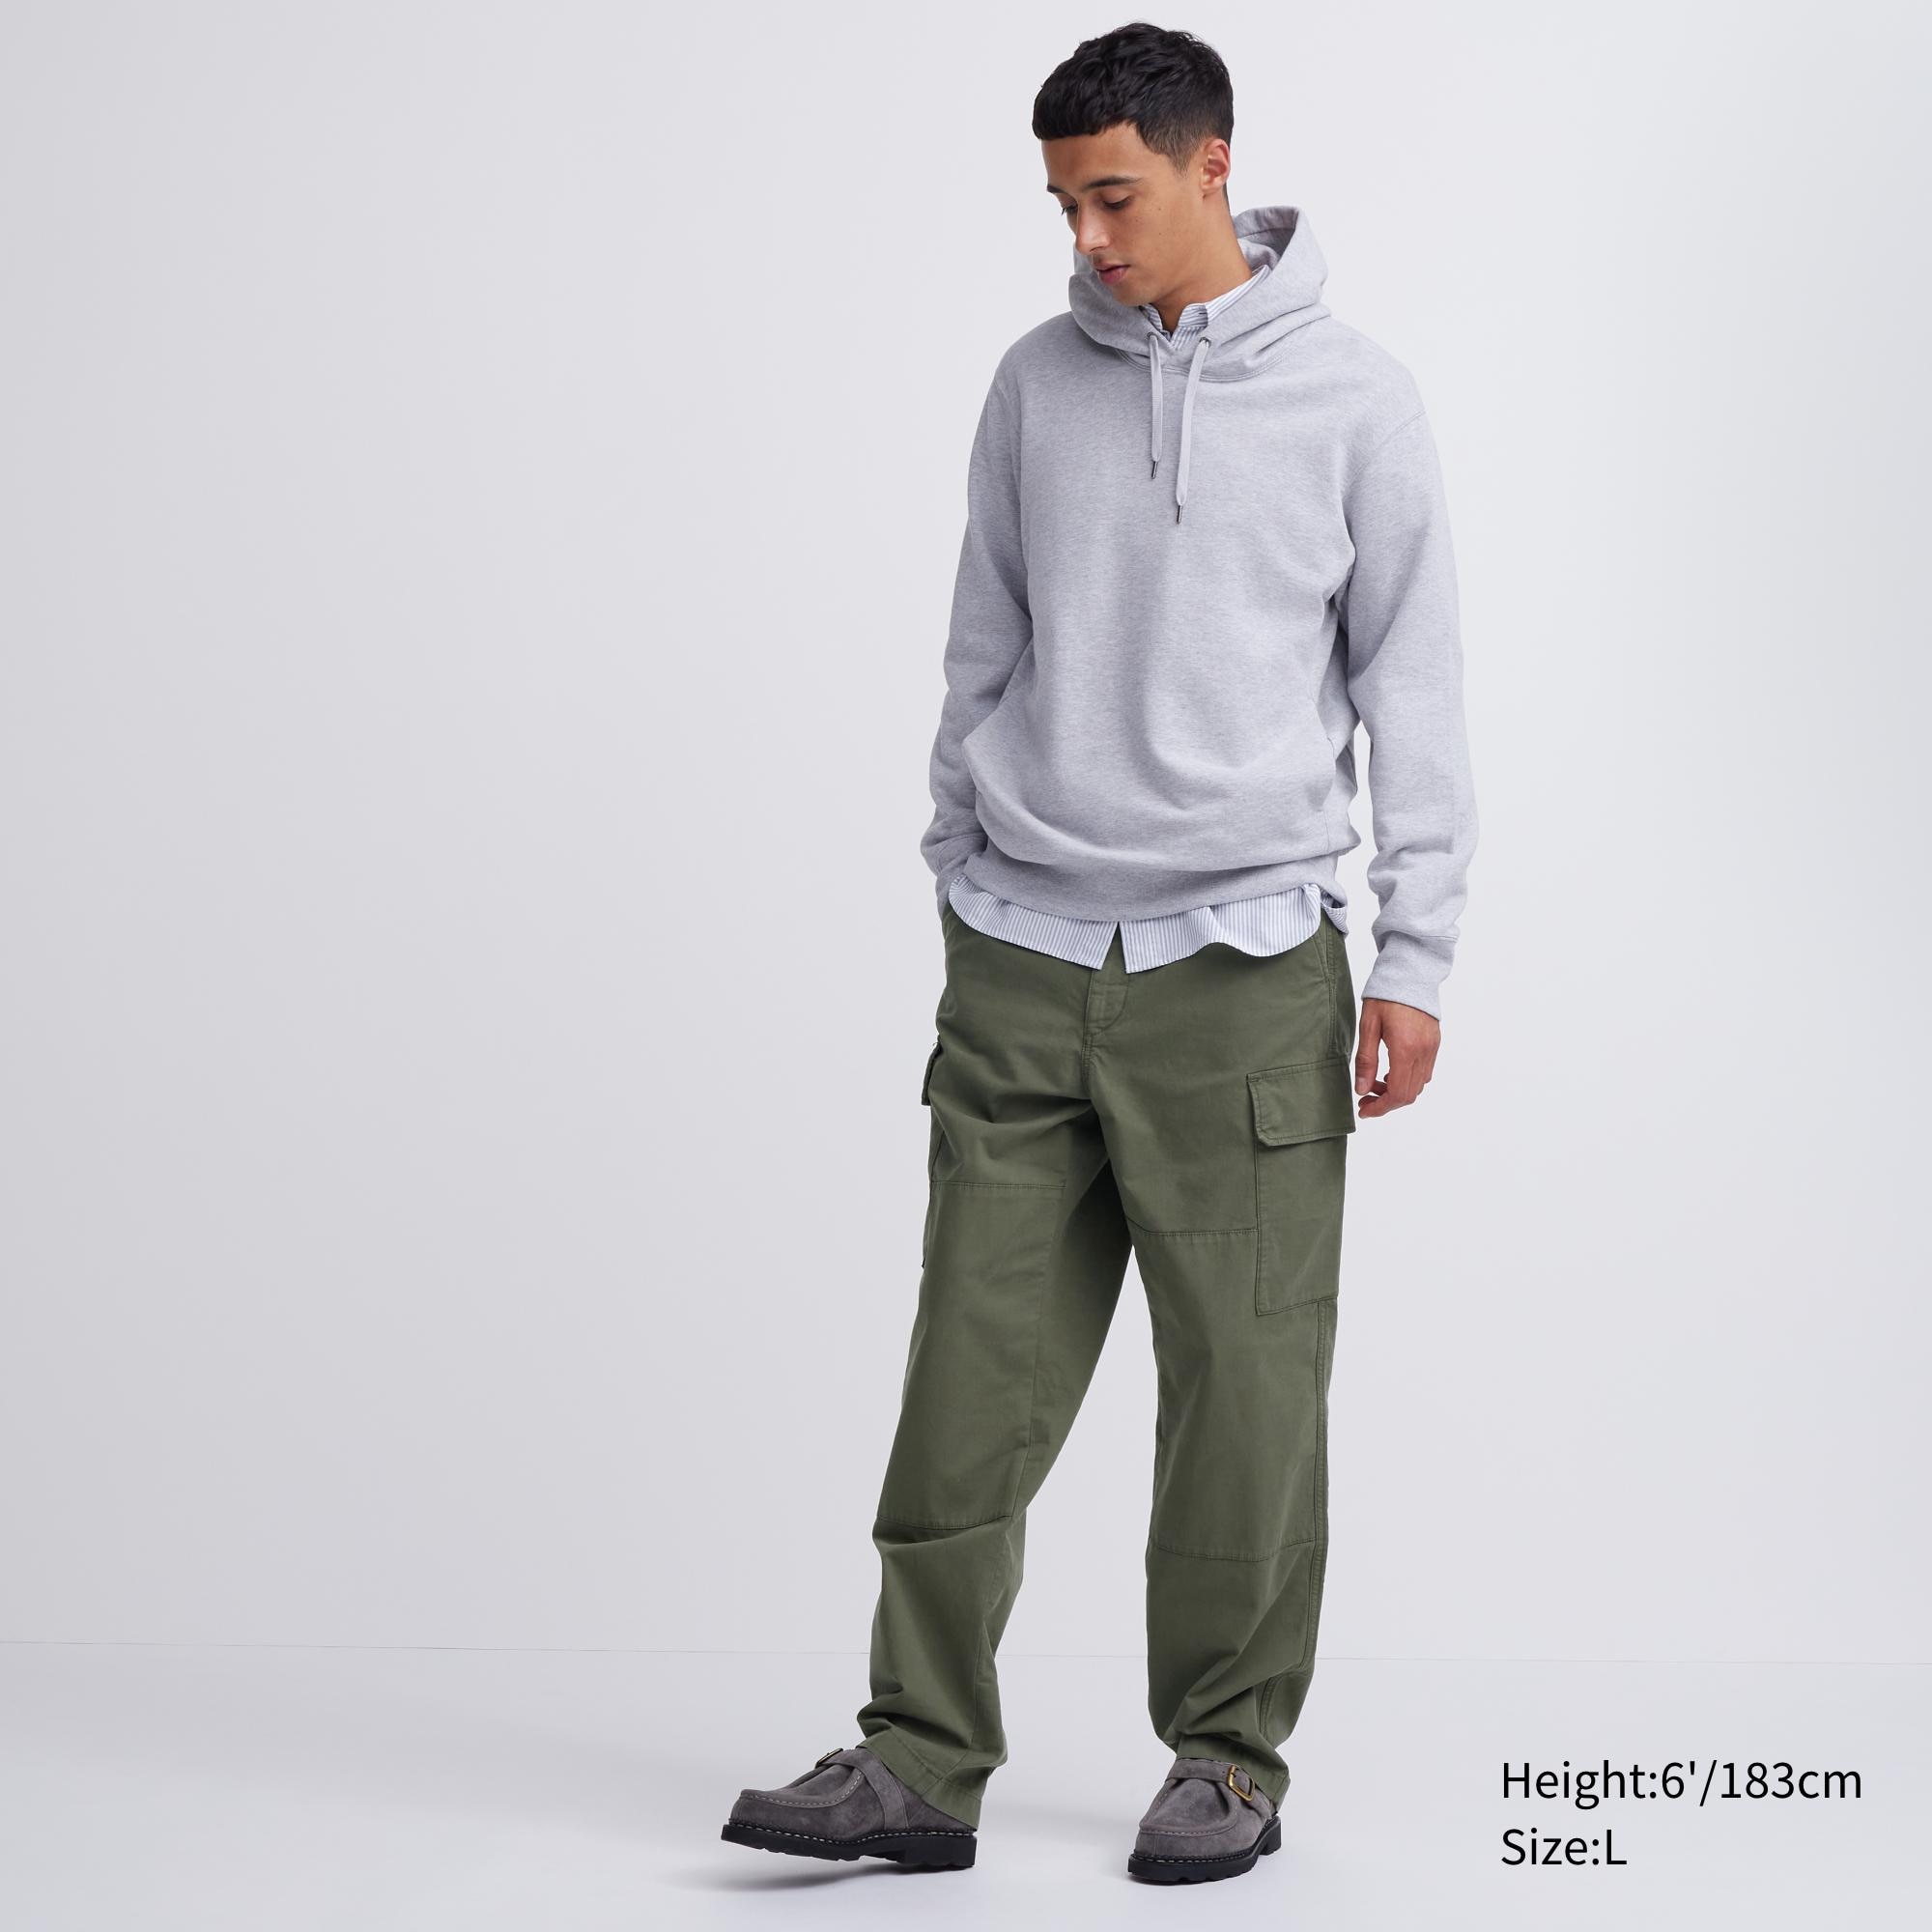 We've Found the World's Most Comfortable Cargos